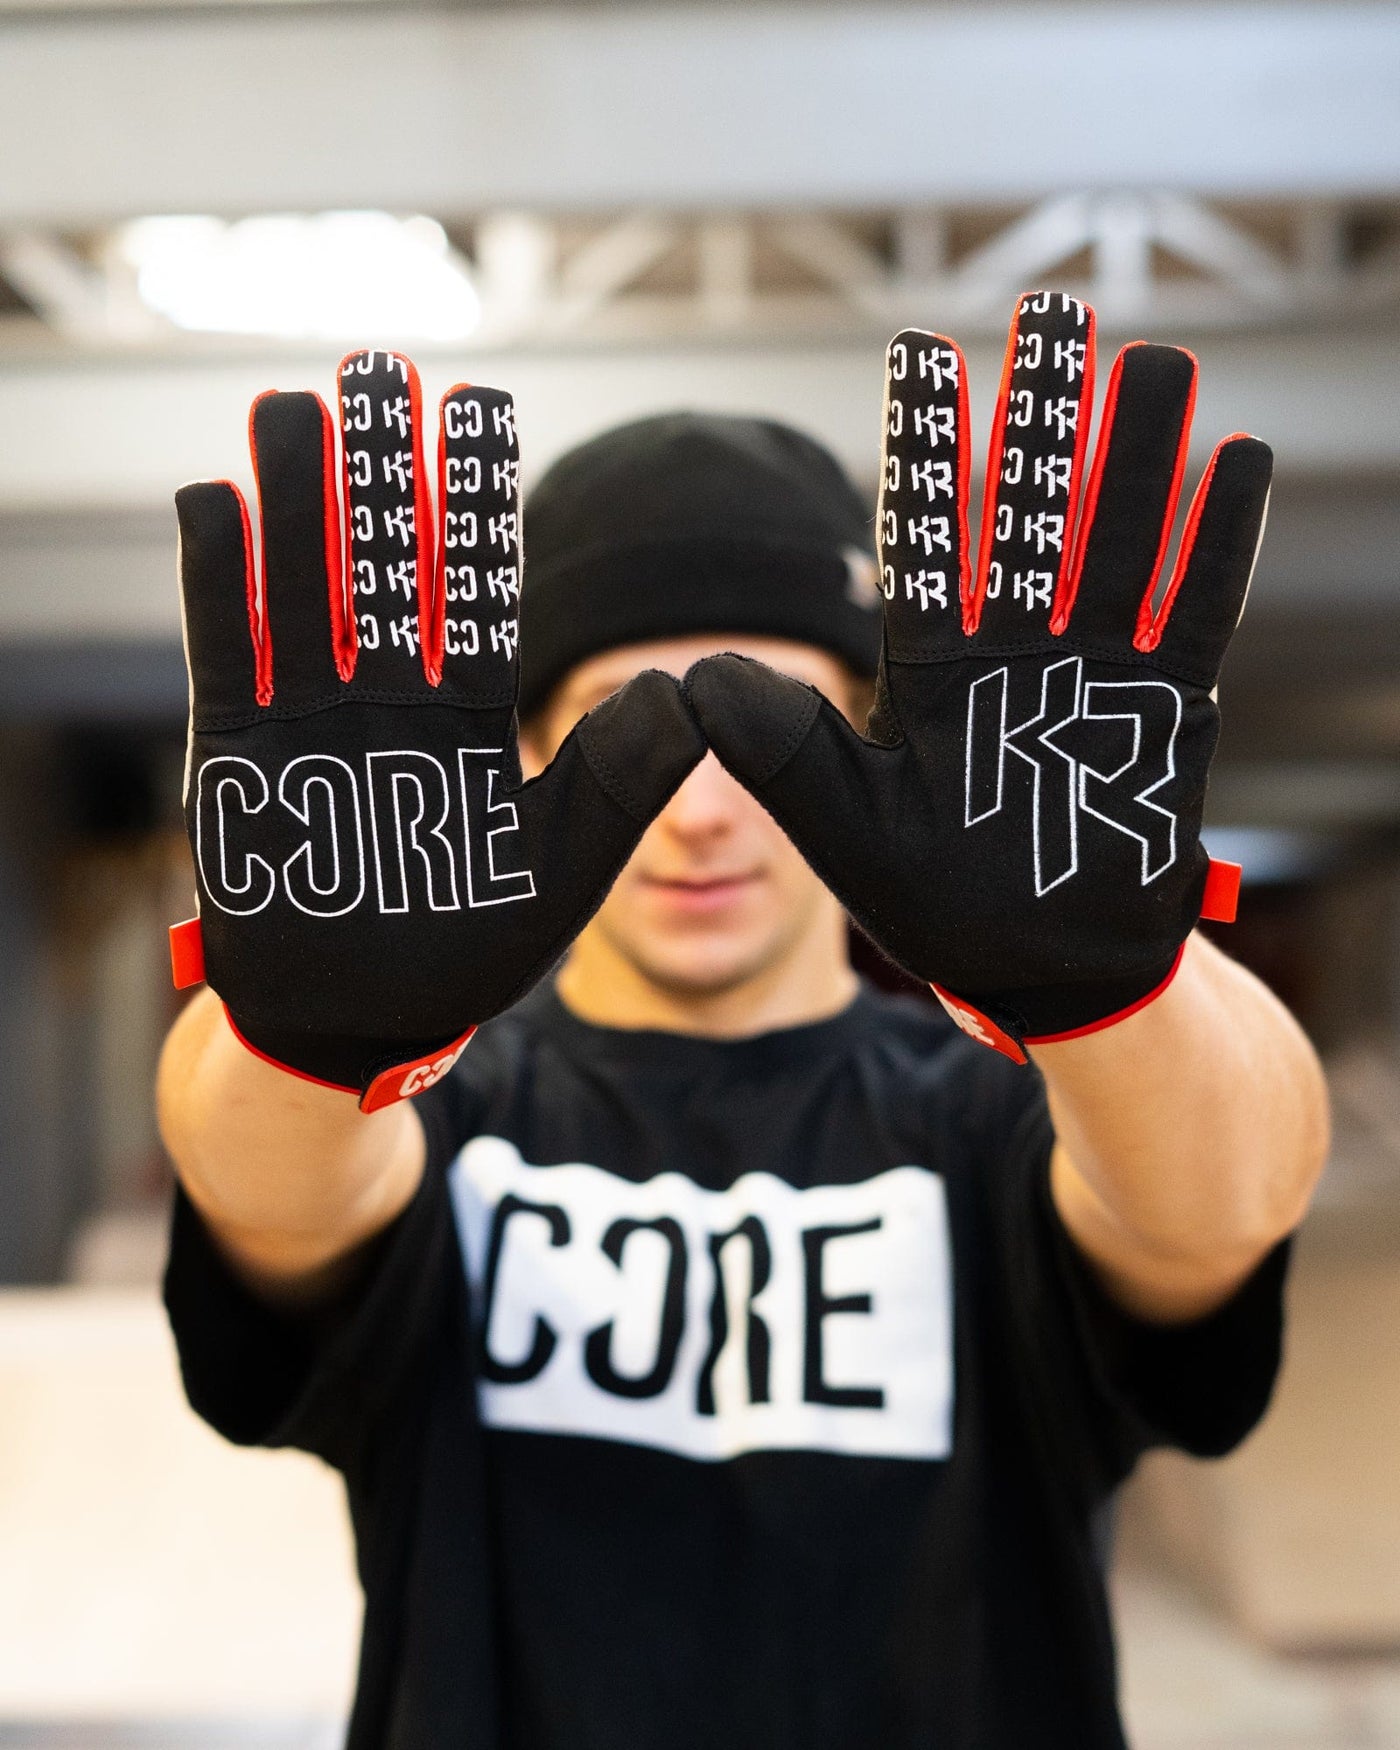 CORE Protection BMX Gloves Kieran Reilly I Bike Gloves Using Product